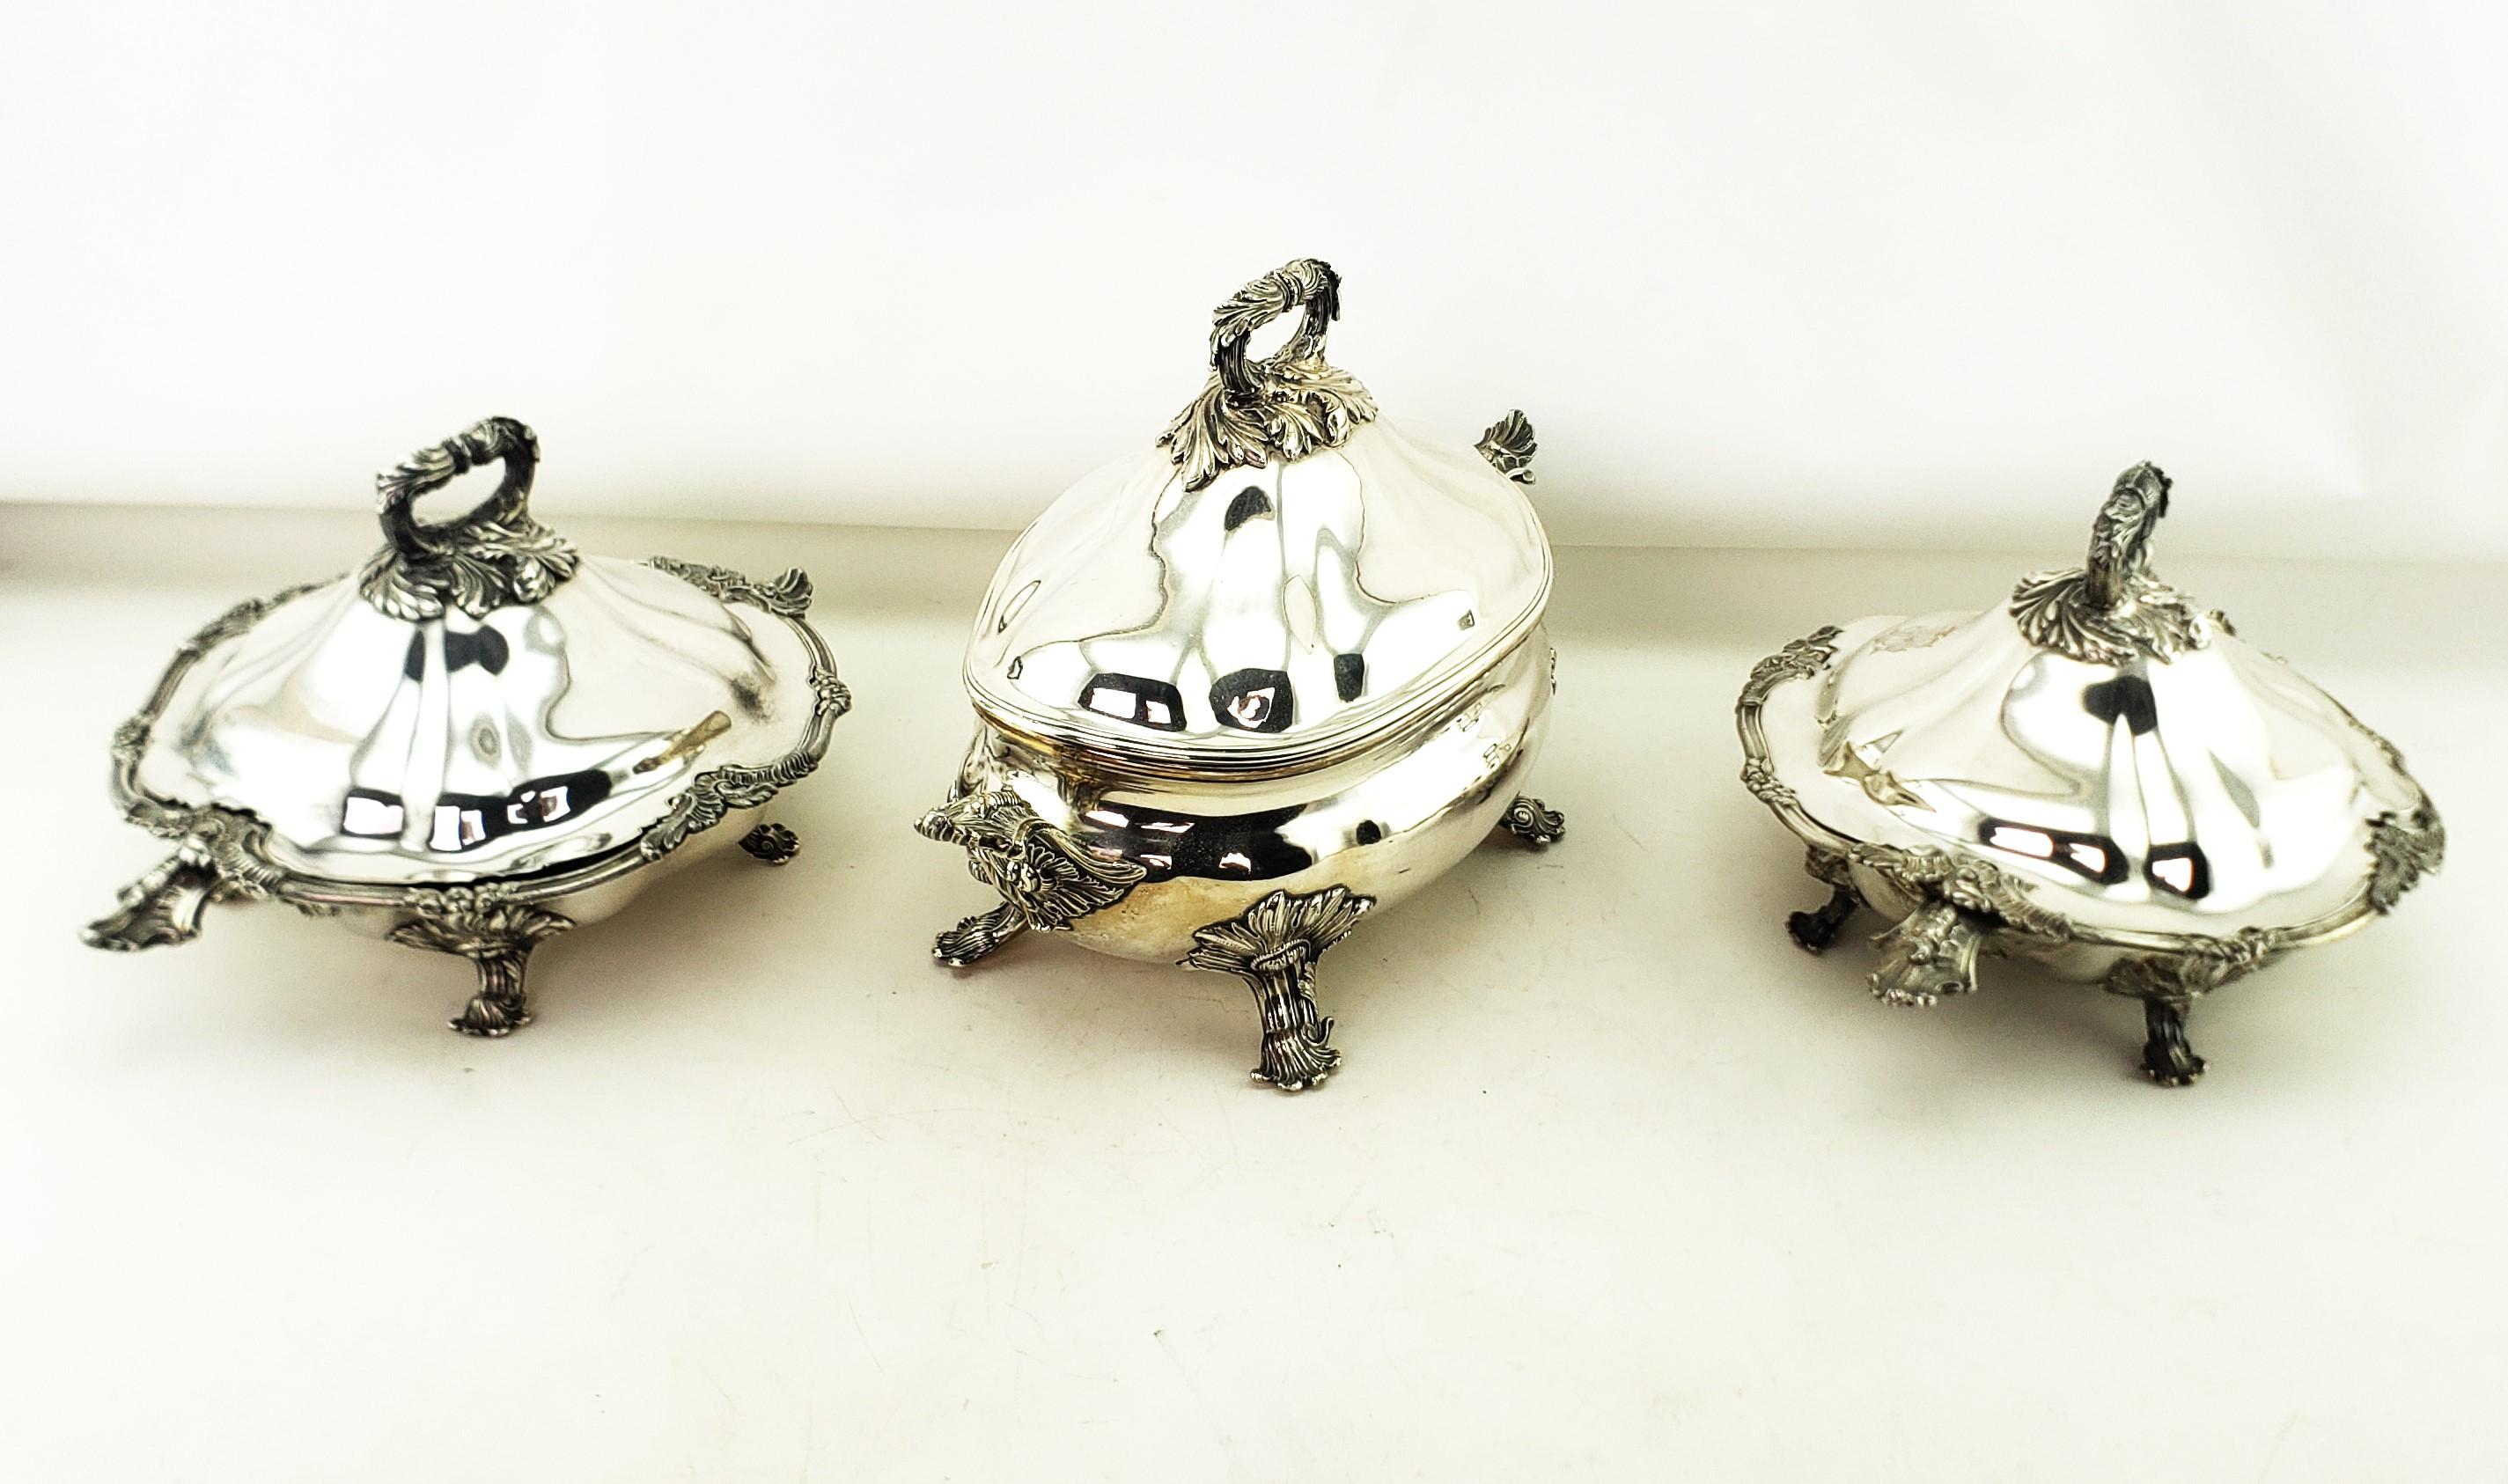 This set of three antique Sheffield plated covered tureens are unsigned, but presumed to have originated from England and date to approximately 1820 and done in the period Georgian style. These matching tureens are done in a heavy Sheffield plate